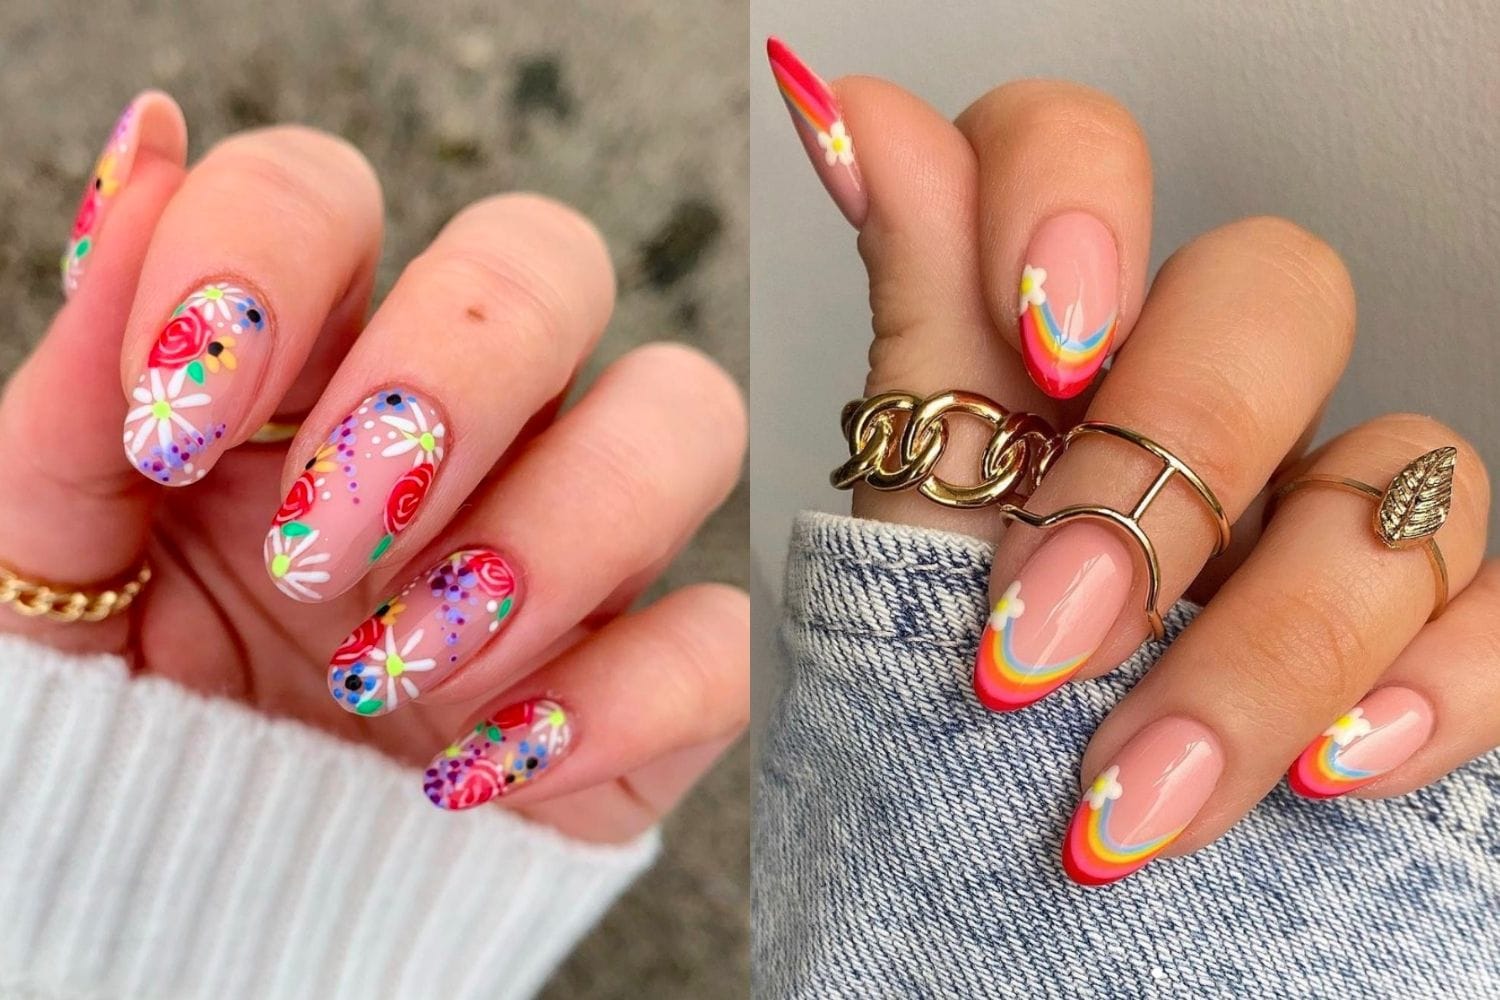 4. "Spring Nail Trends for Black Women" - wide 7